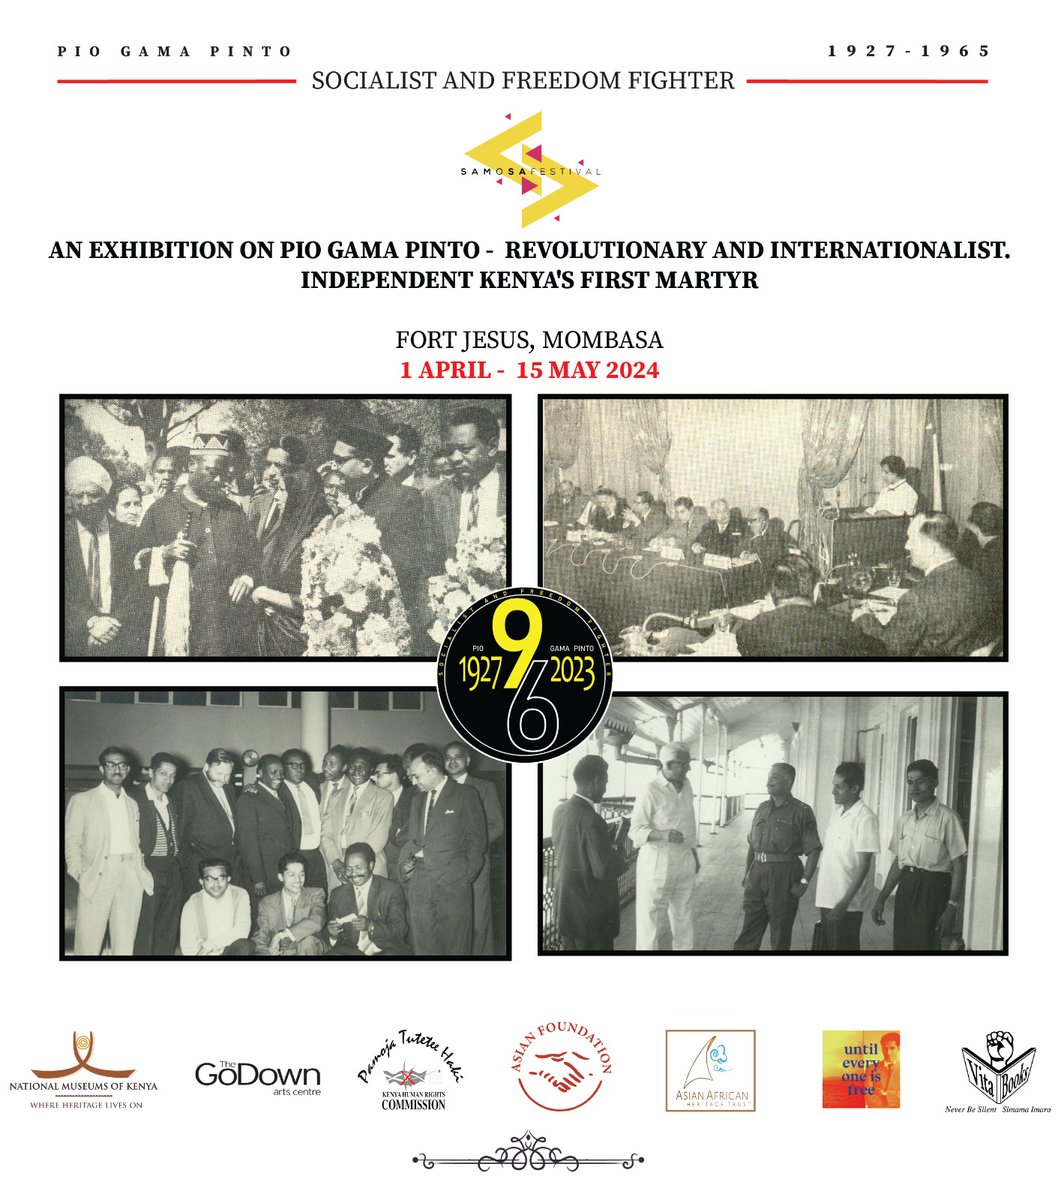 The Pio Gama Pinto Exhibition moves to the coast at Fort Jesus from 1 April - 15 May 2024. Various publications and momentos will be available at the Souvenir shop. Don't miss it!